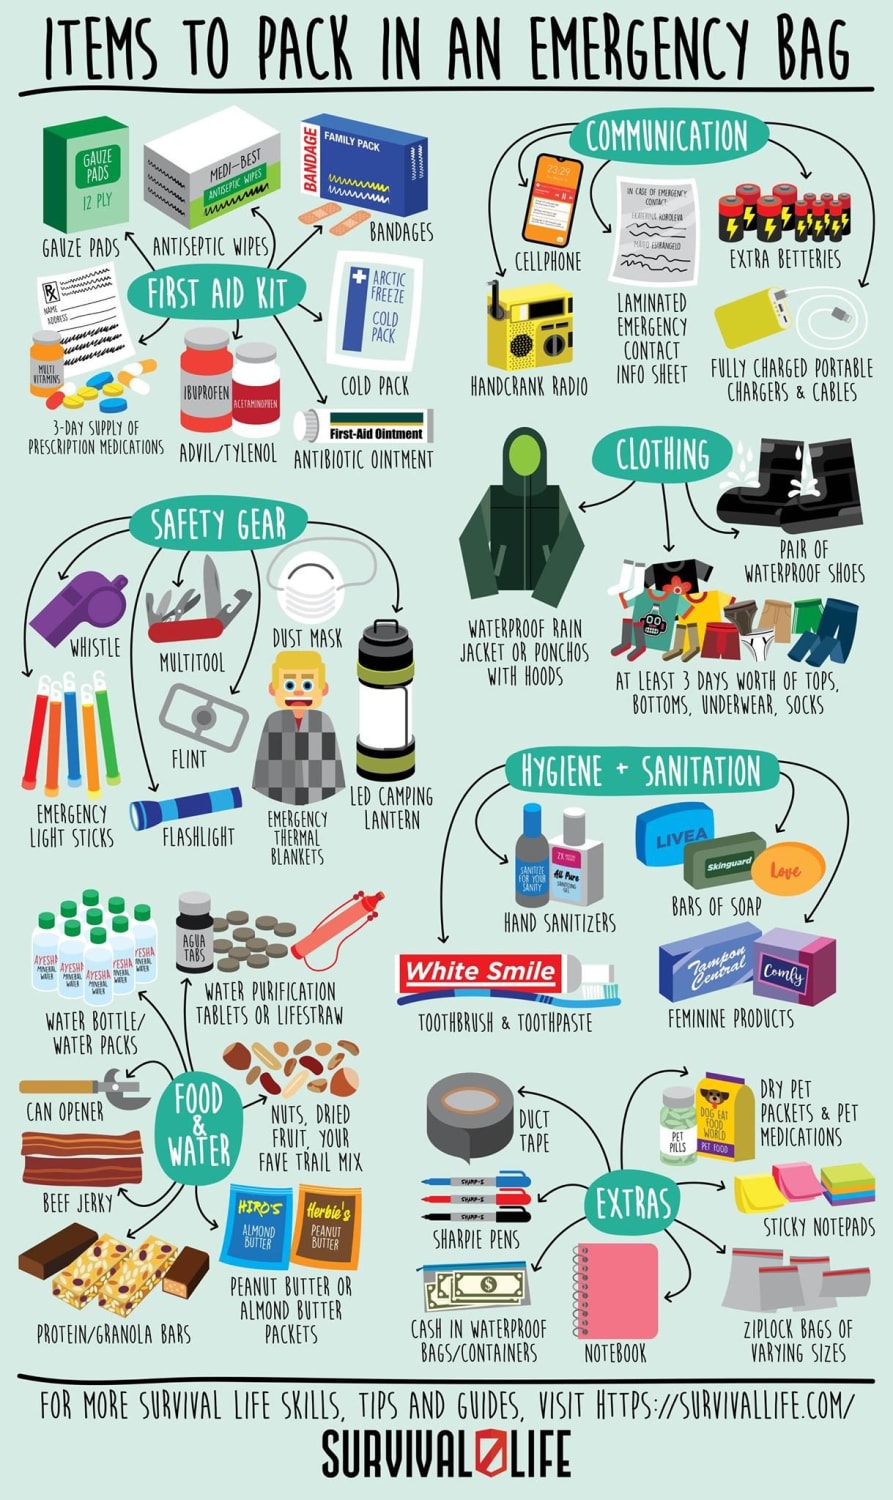 17 Items to Pack in an Emergency Bag